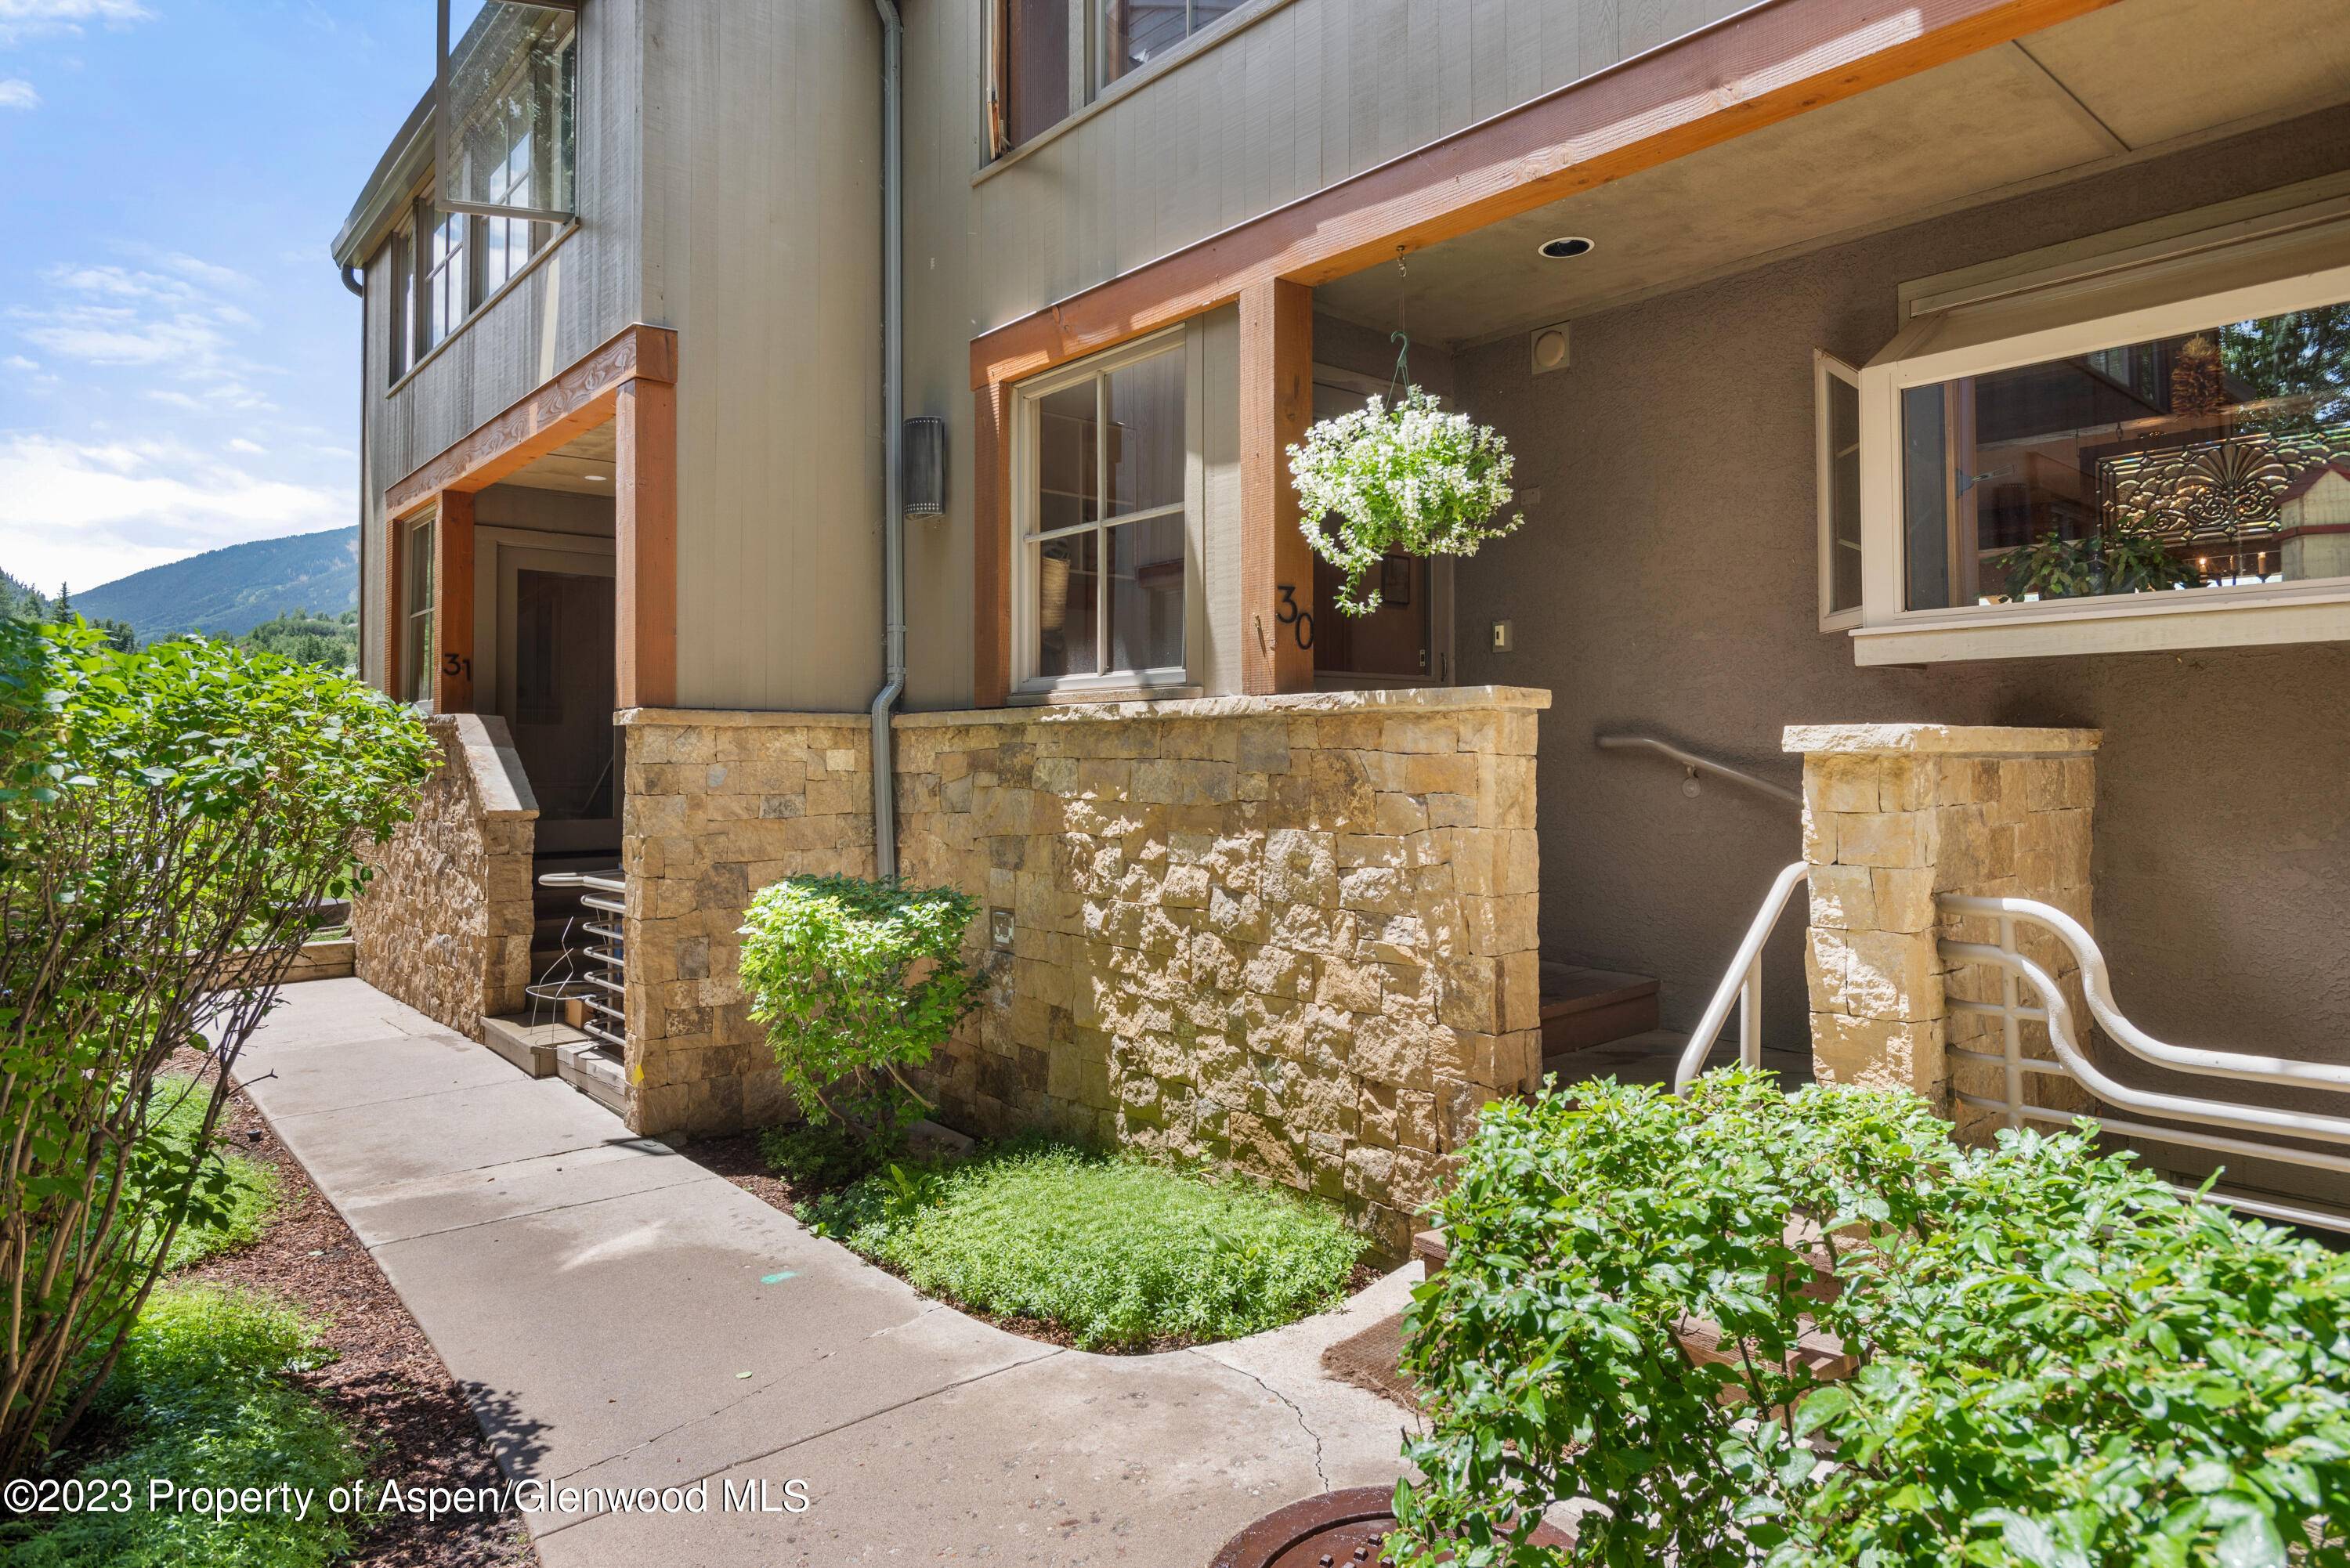 Welcome to 100 N. 8th Street 30, a charming Aspen townhome in a prime location.